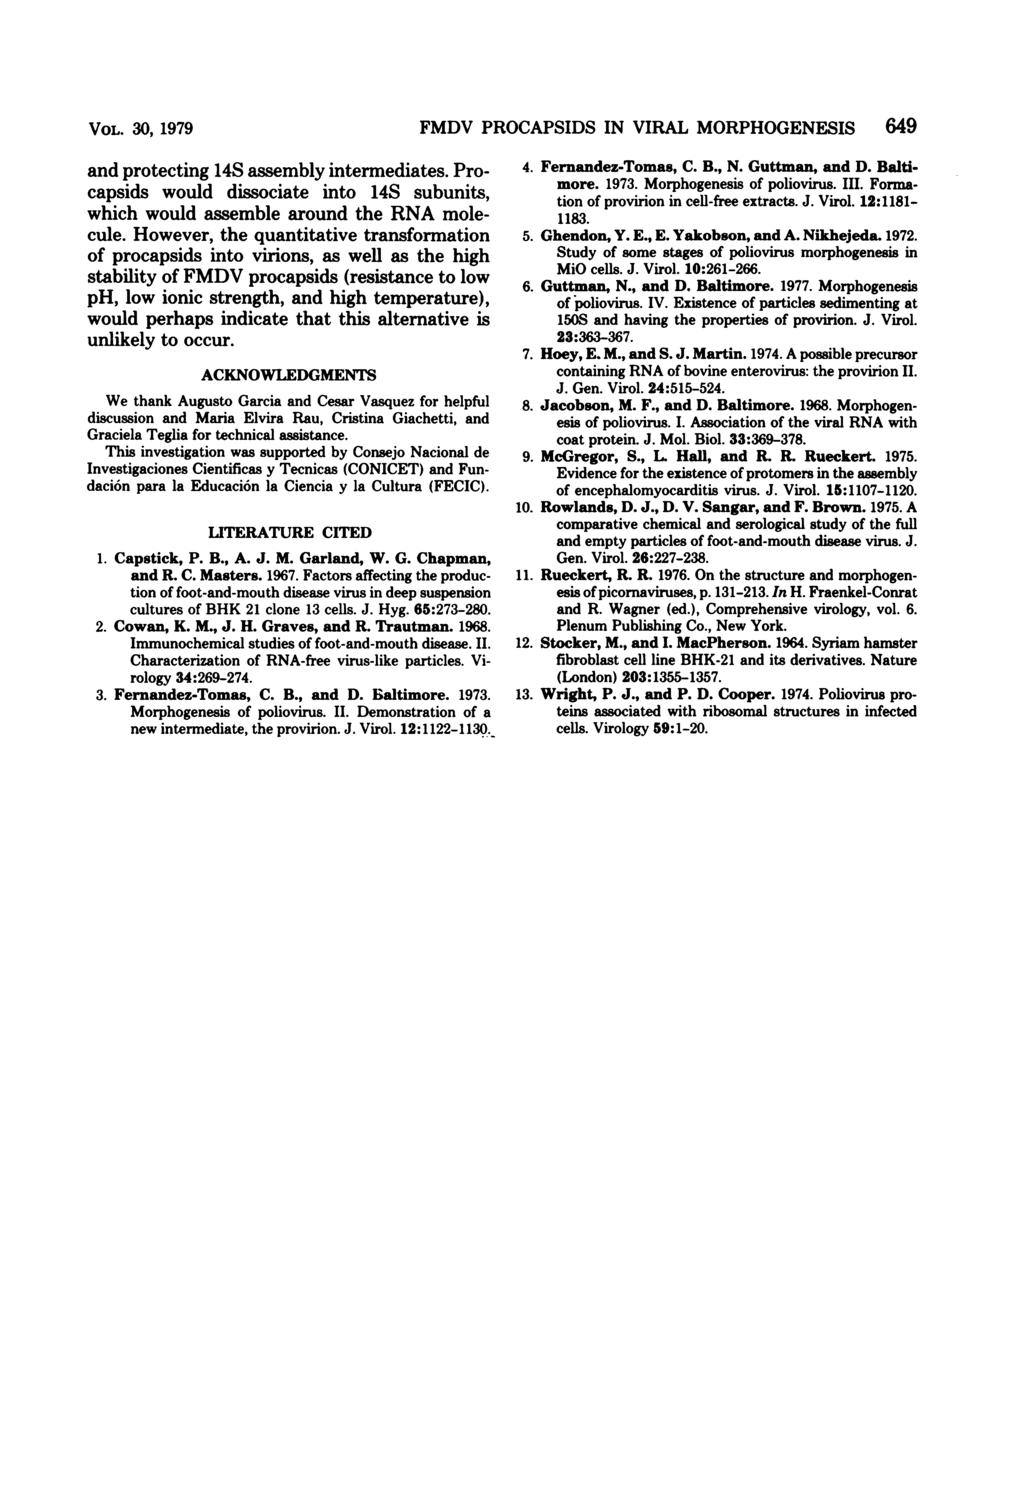 VOL. 3, 1979 and protecting 14S assembly intermediates. Procapsids would dissociate into 14S subunits, which would assemble around the RNA molecule.